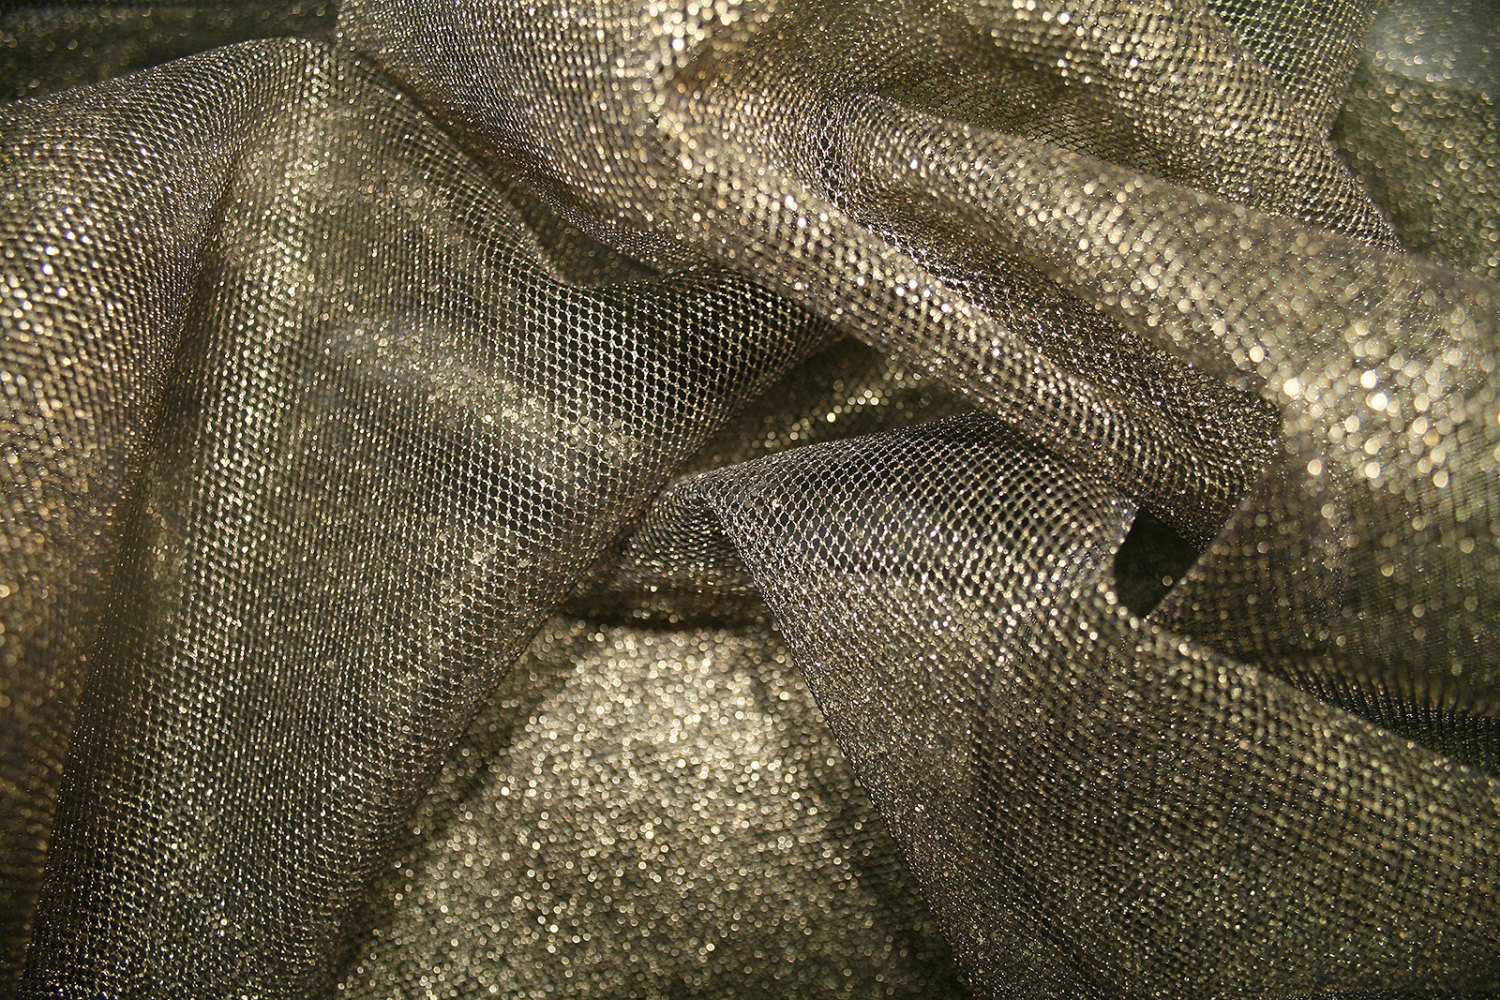 Metallic gold Tulle fabric, Netting, Christmas Tablecloth, Tutus, Skirts, Garters, Fascinators, millinery Hat party decoration 150cm 60"